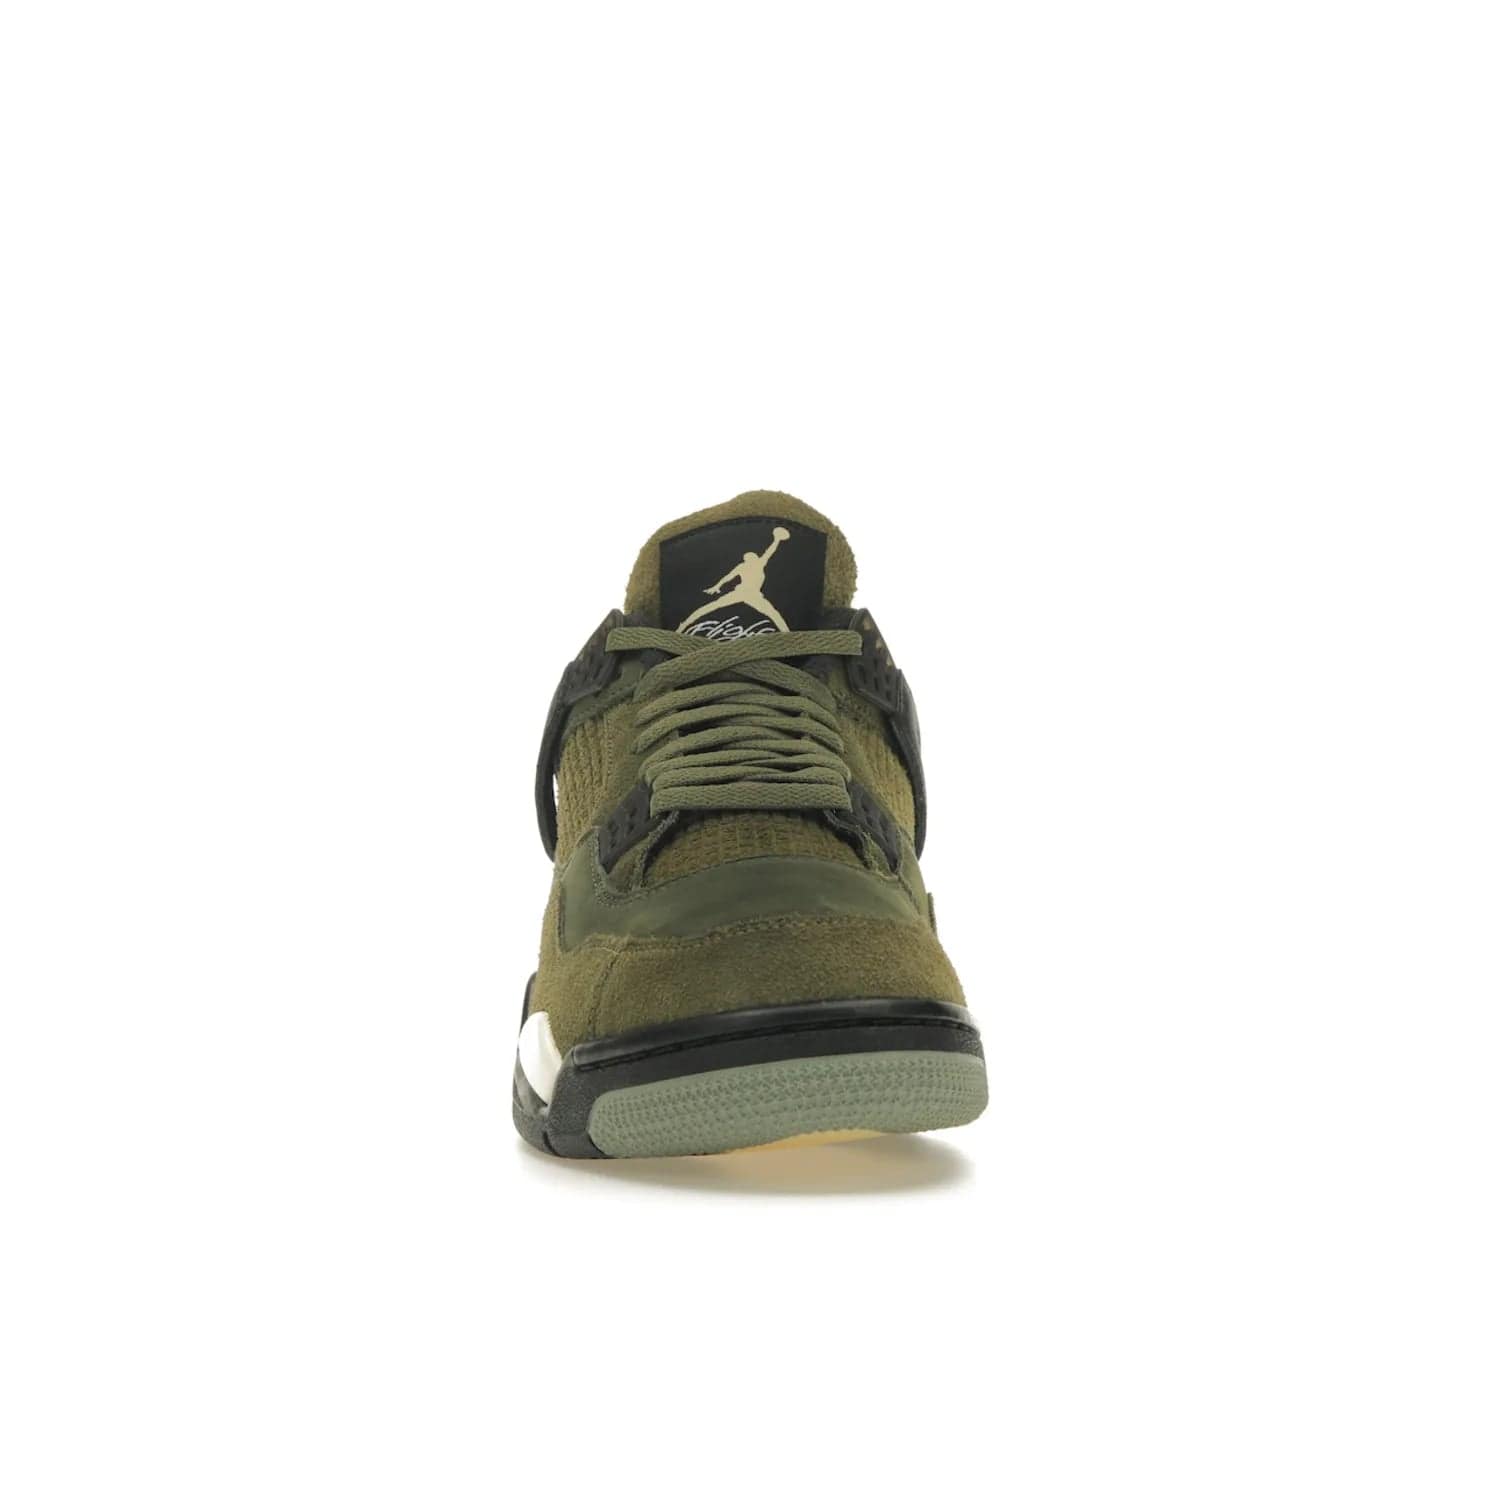 Jordan 4 Retro SE Craft Medium Olive - Image 10 - Only at www.BallersClubKickz.com - Grab the Jordan 4 Retro SE Crafts for a unique style. Combines Medium Olive, Pale Vanilla, Khaki, Black and Sail, with same classic shape, cushioning, and rubber outsole. Available on November 18th!